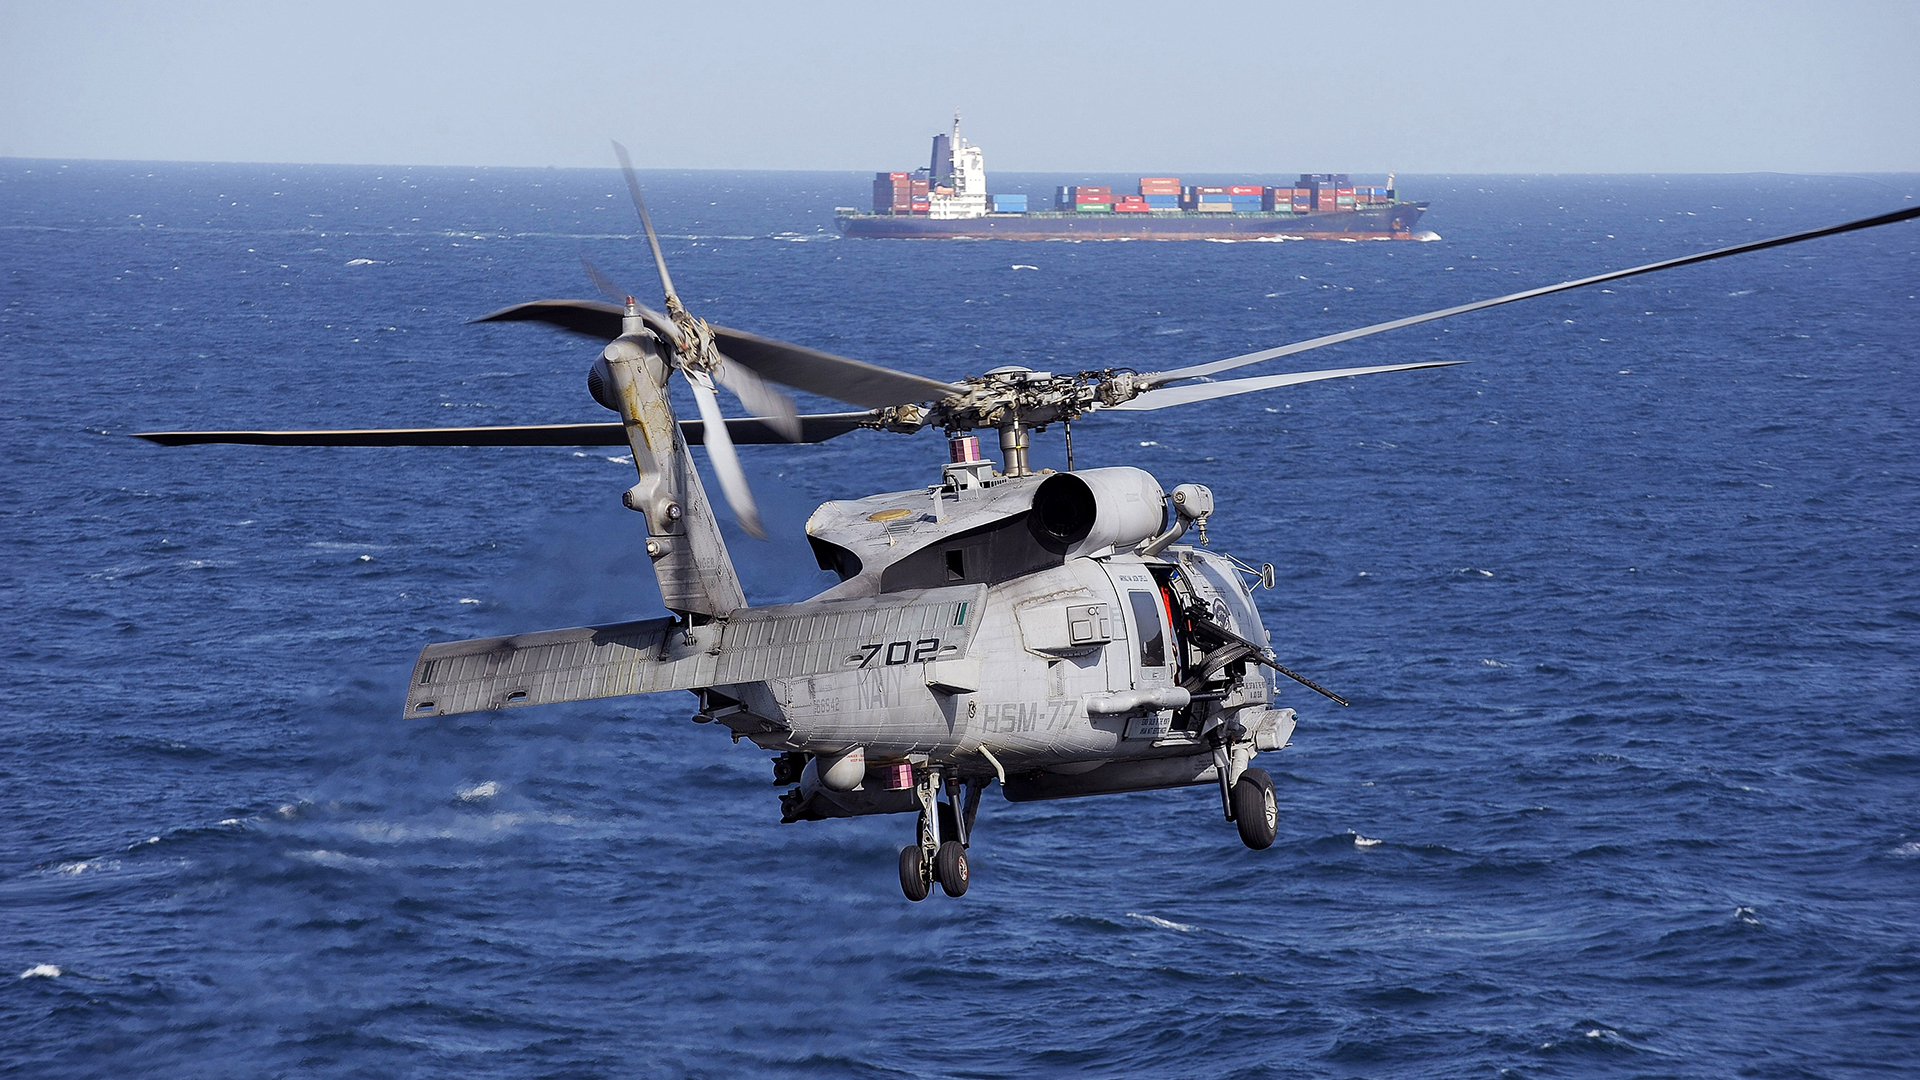 Will there be further attacks following the sinking of Houthi ships by US Navy helicopters?